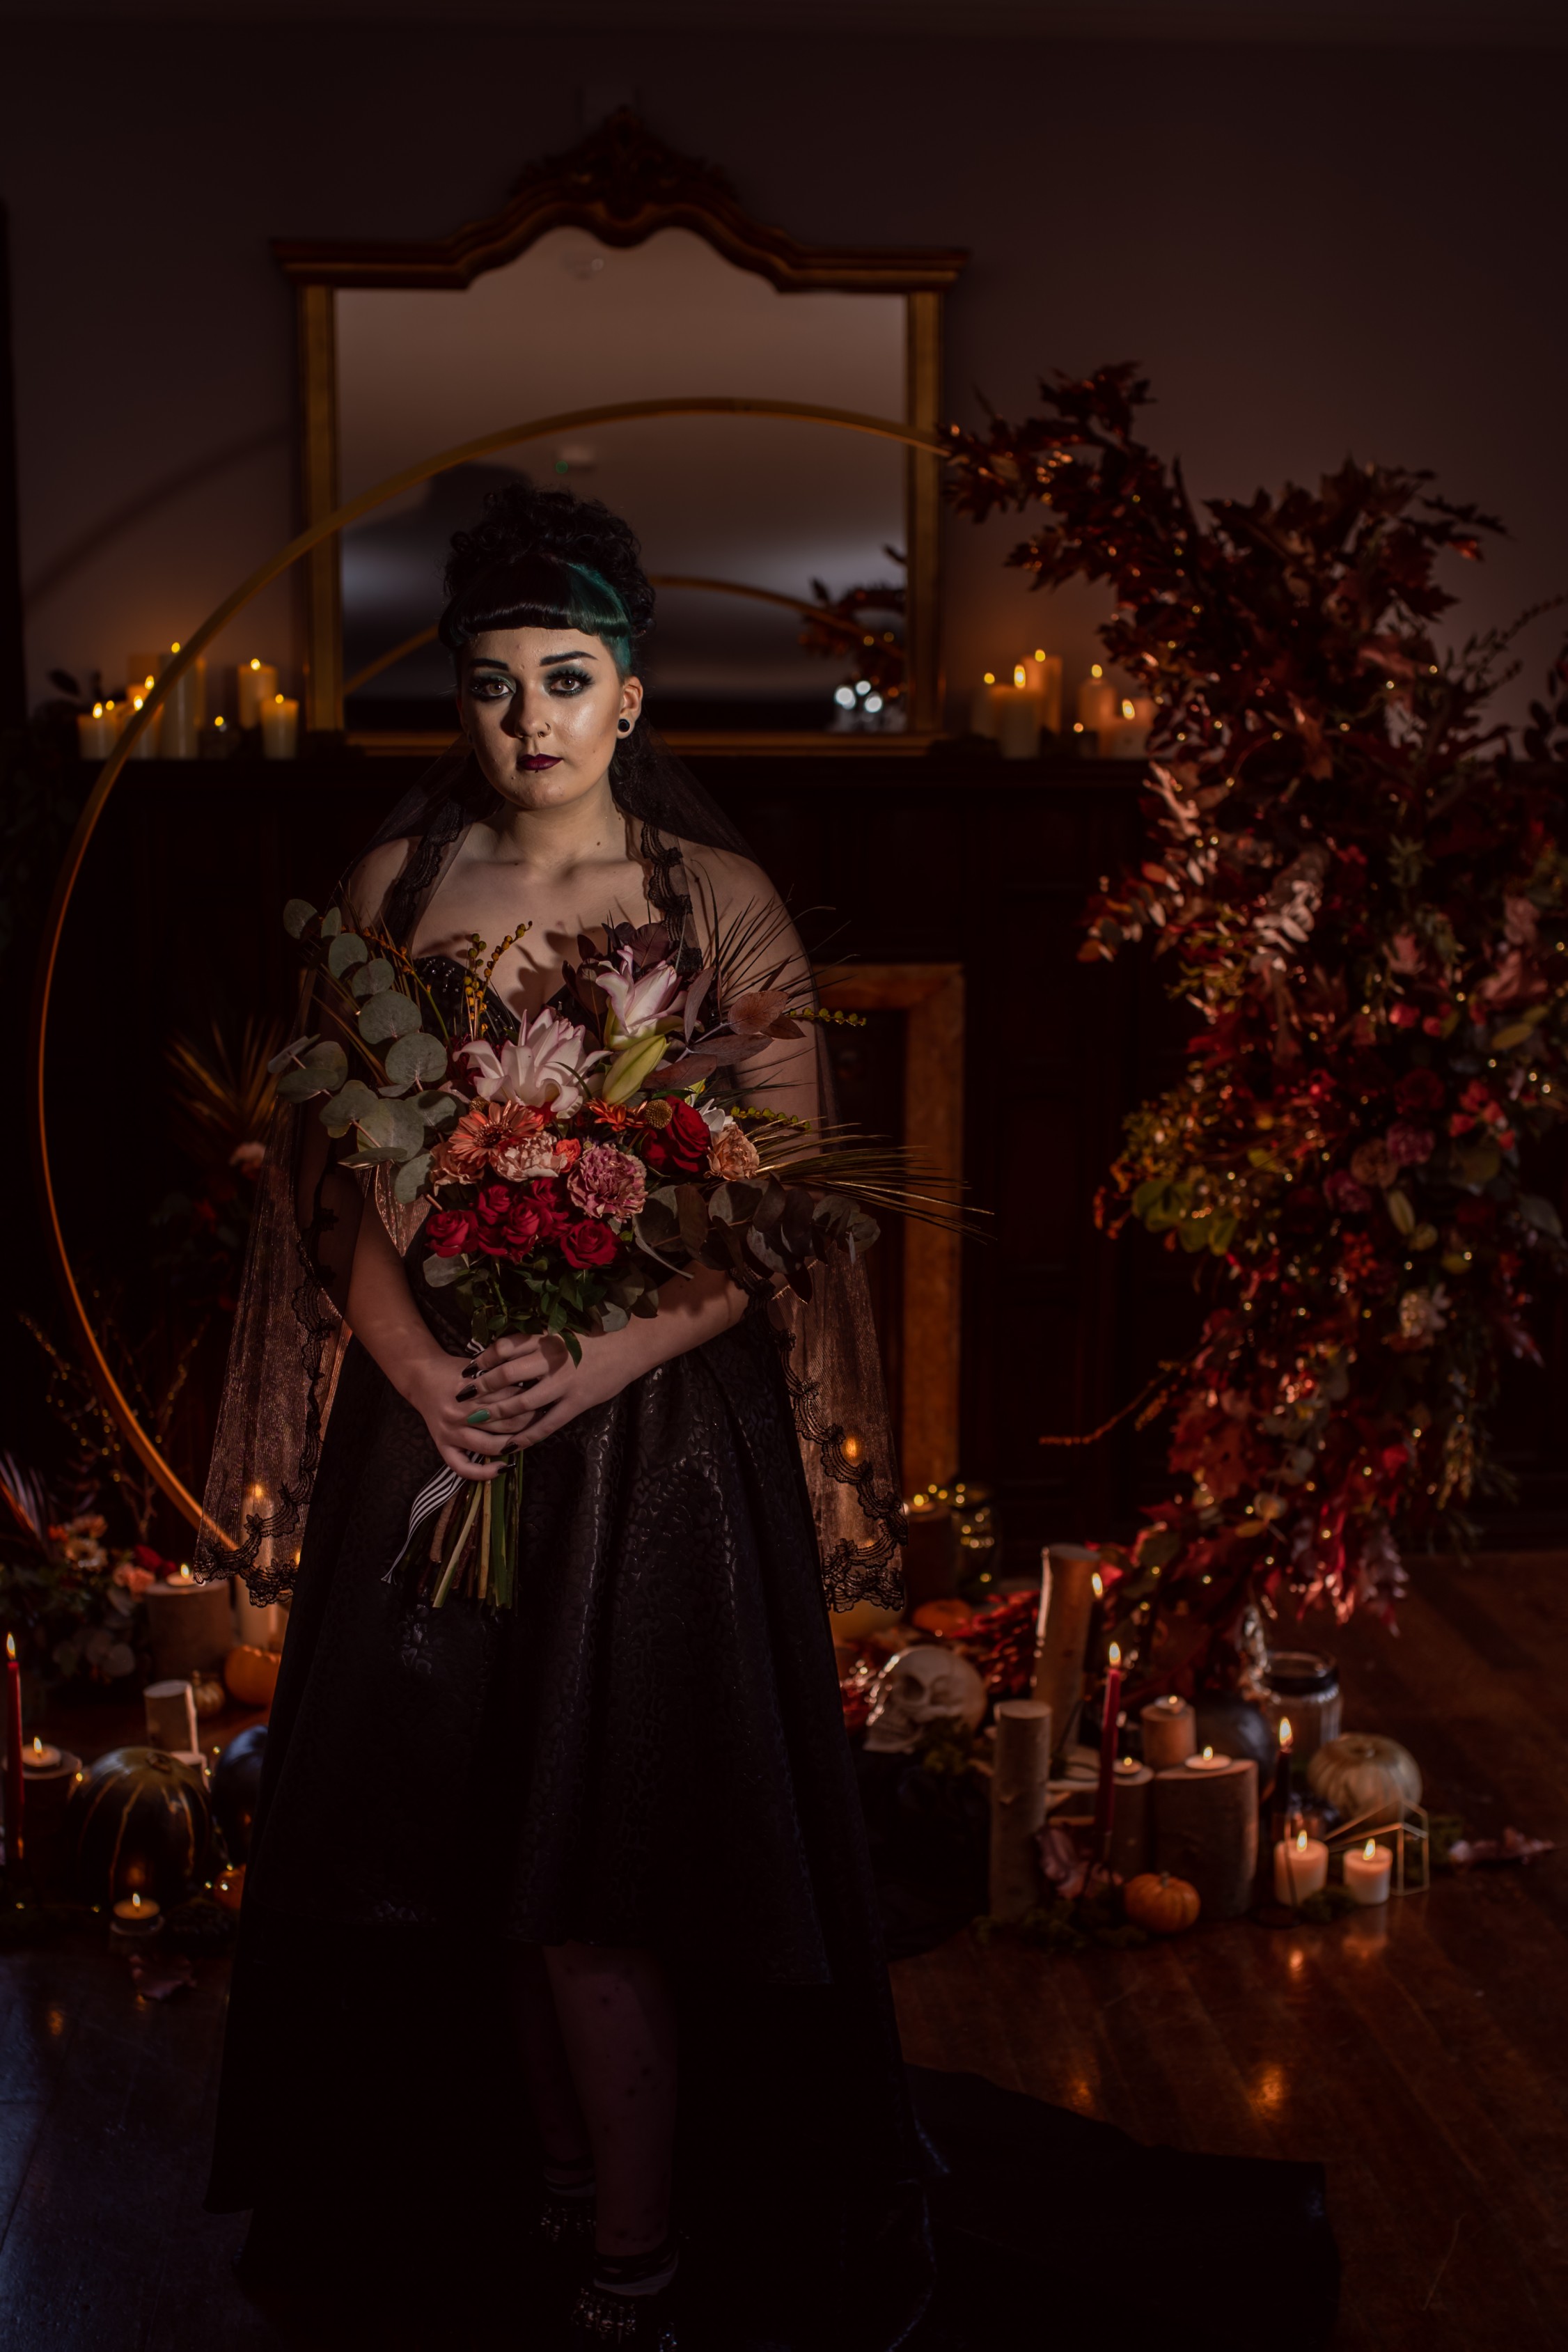 halloween bride - gothic halloween wedding set up - bride standing in front of dramatic floral arch in the candlelight with wedding bouquet - autumn colours of gold, copper and black